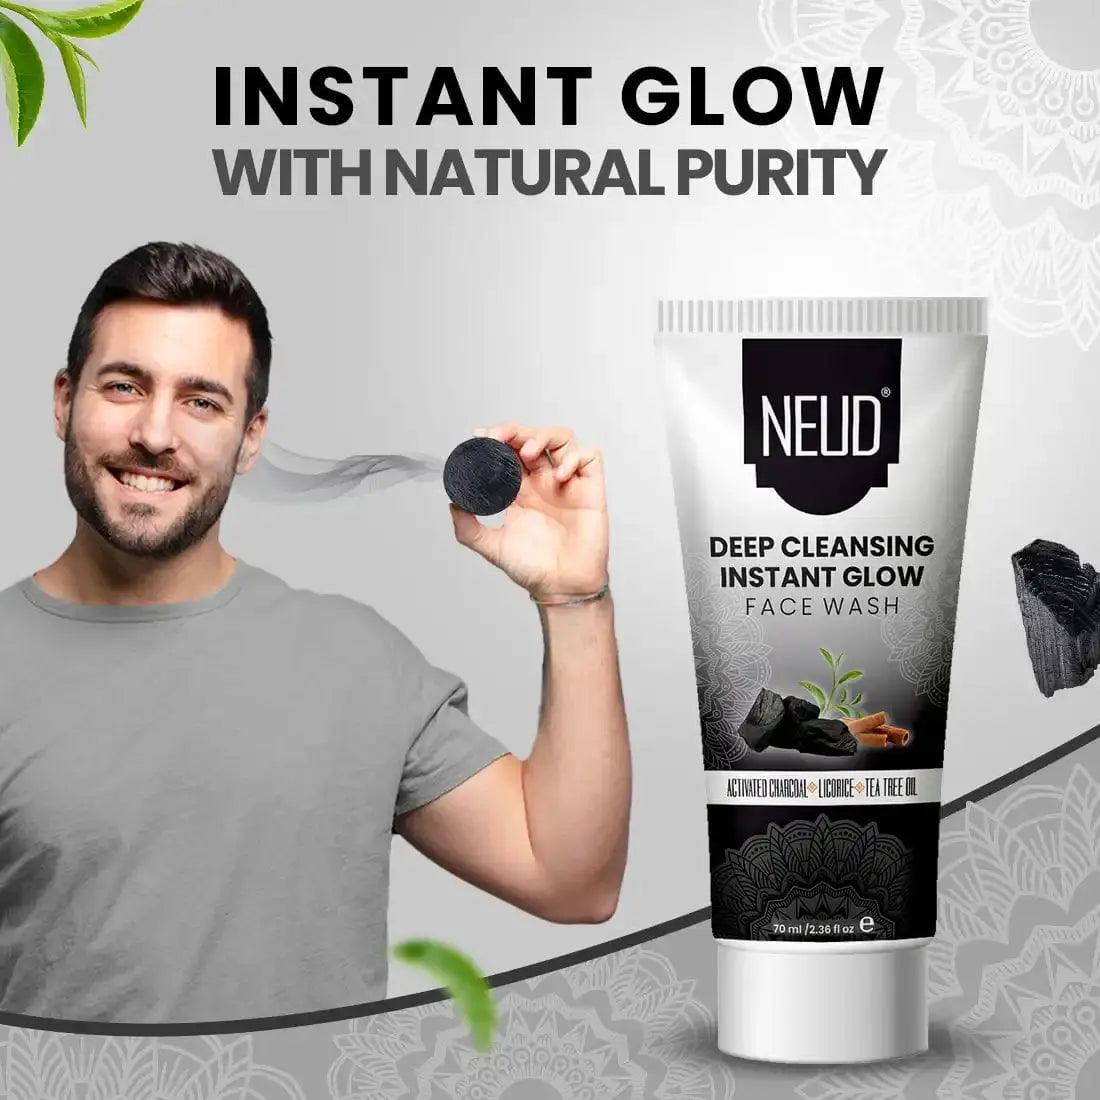 Get Instant Pure Glow With NEUD Deep Cleansing Instant Glow Face Wash for Men and Women